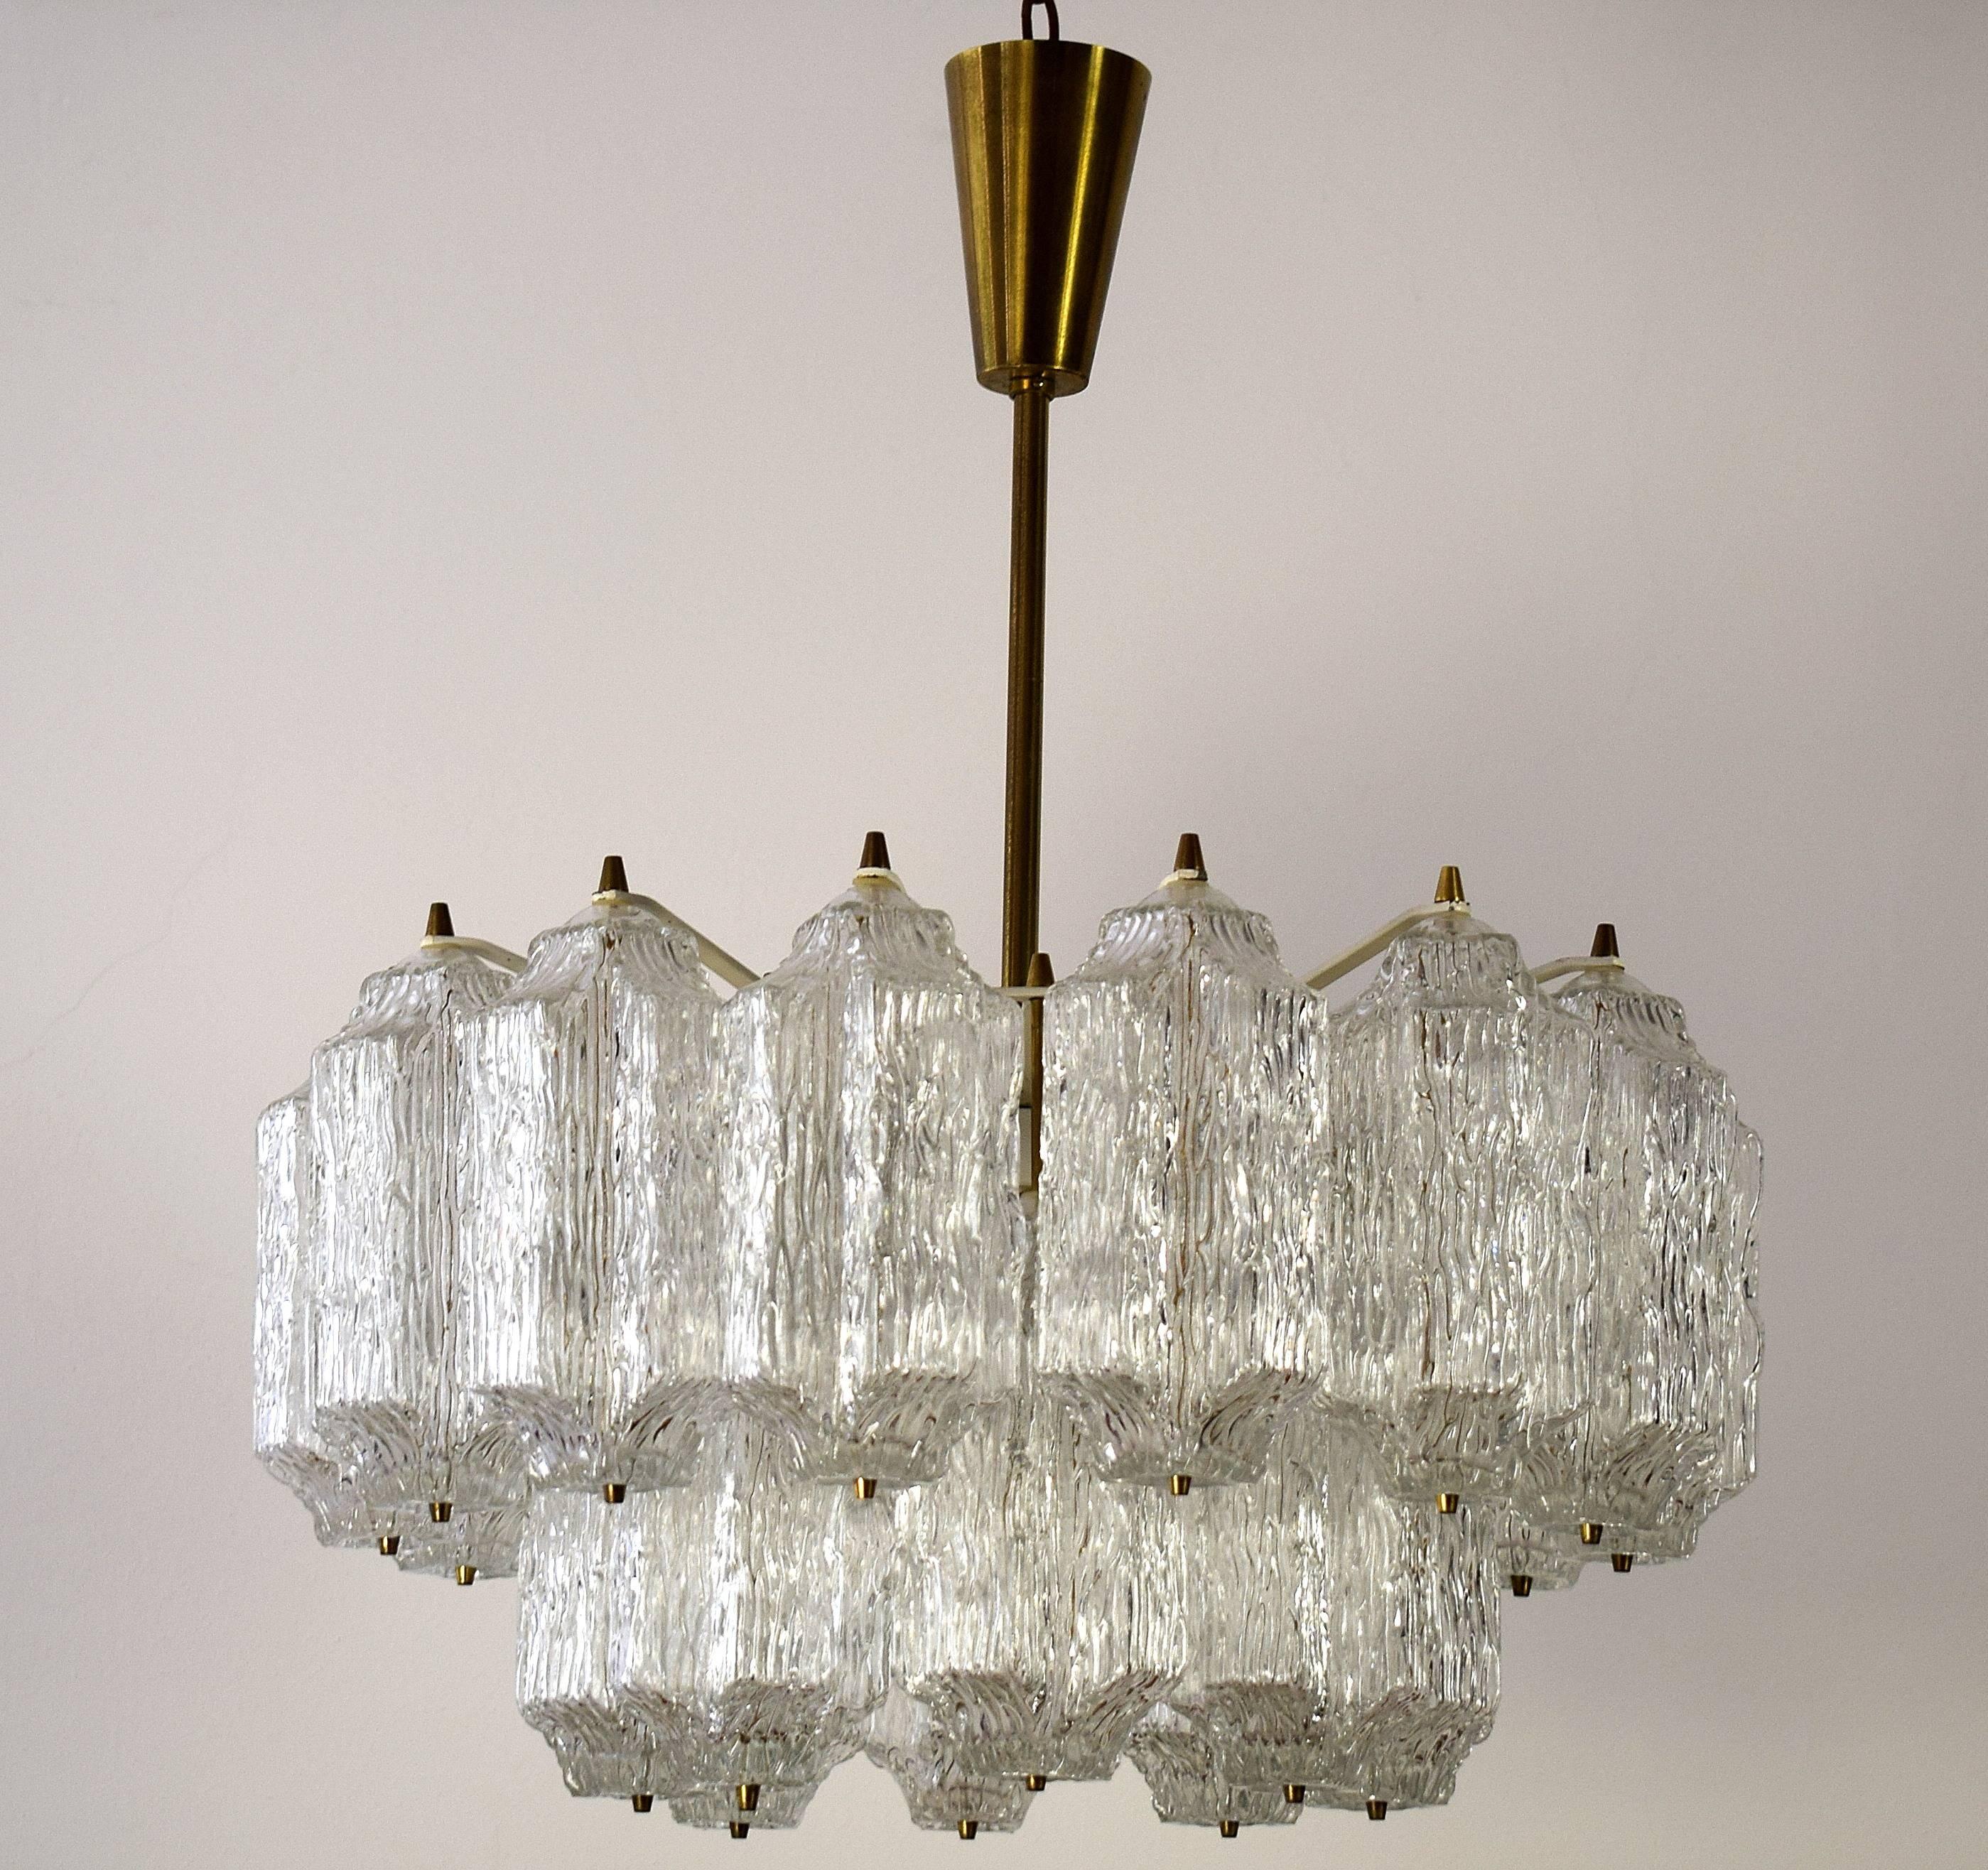 A square and large light fixture by J.T. Kalmar, Austria, manufactured in midcentury, (end of 1960s and beginning of 1970s). 

The fixture is made of white lacquered brass frame with 12 small base bulbs which are covered with 22 ice glasses.